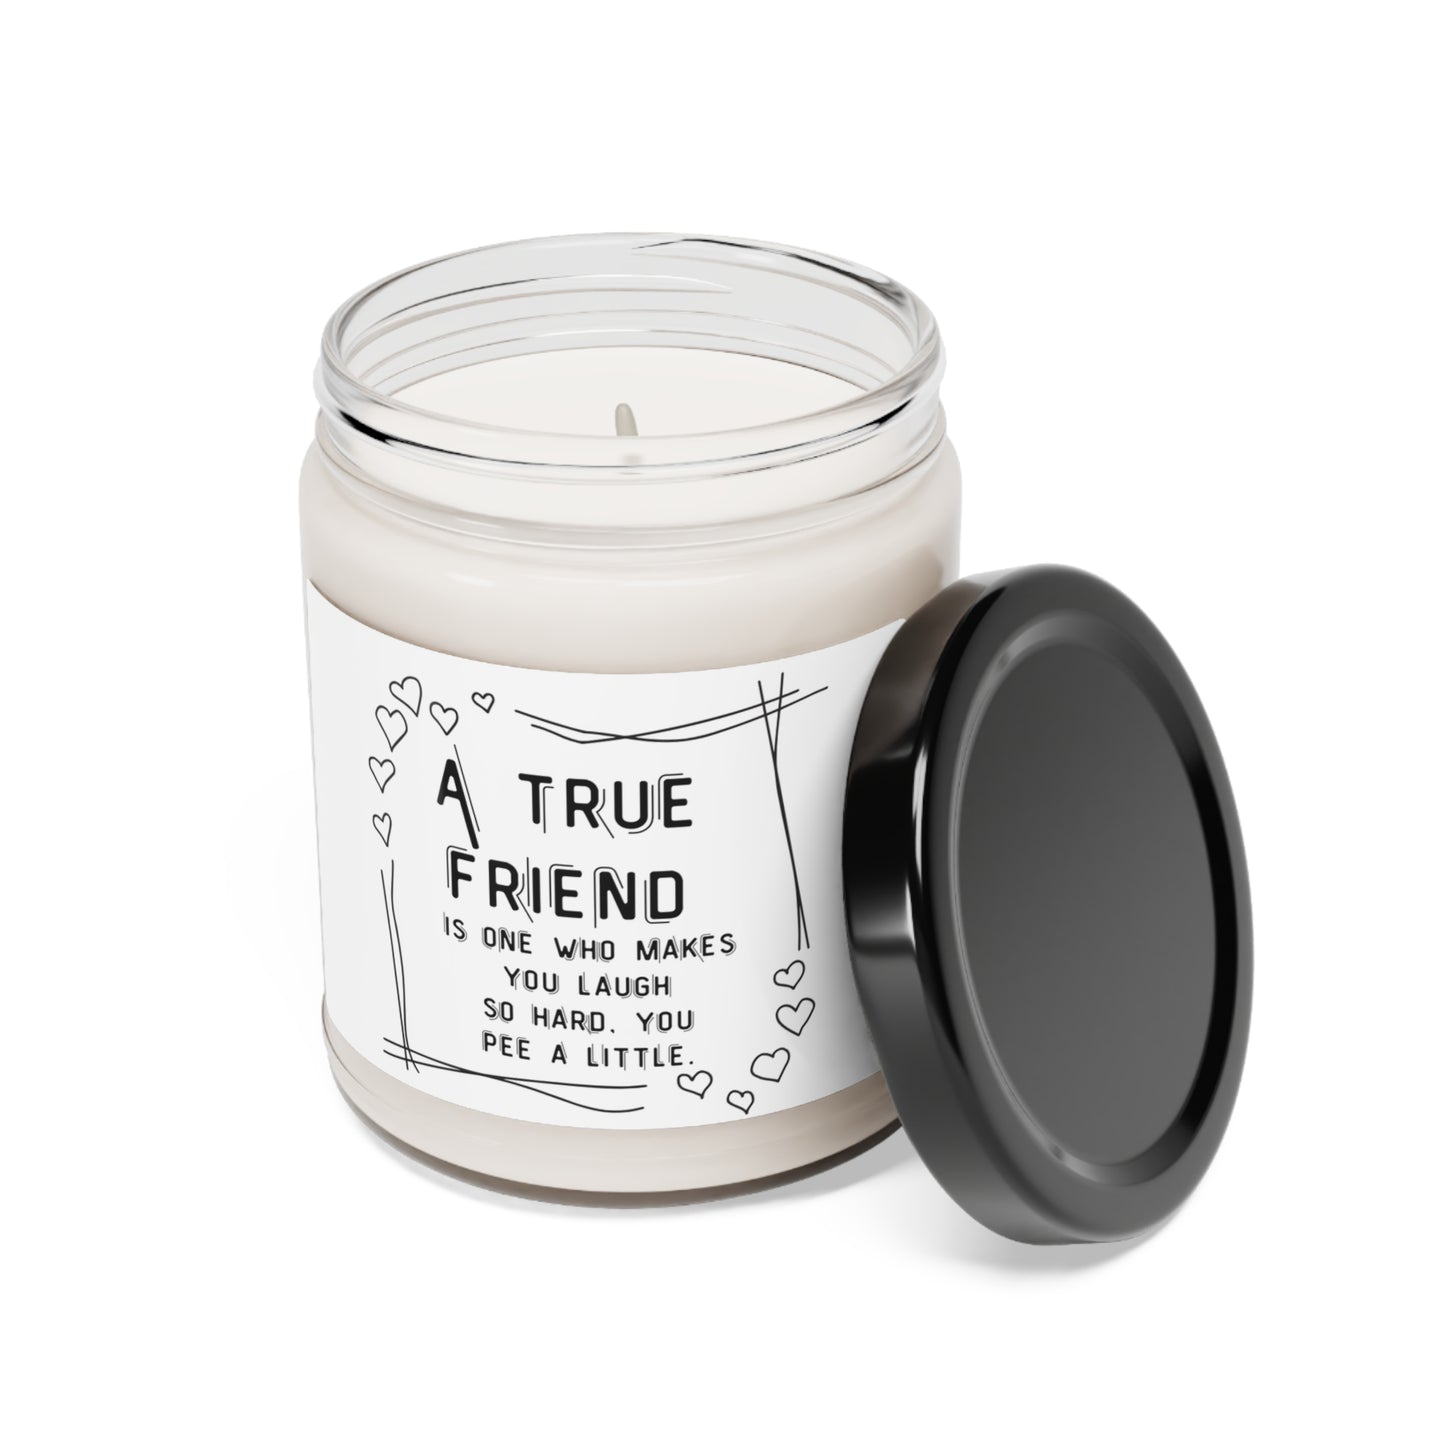 Scented Soy Candle, 9oz.  A true friend is one who makes you laugh so hard you pee a little